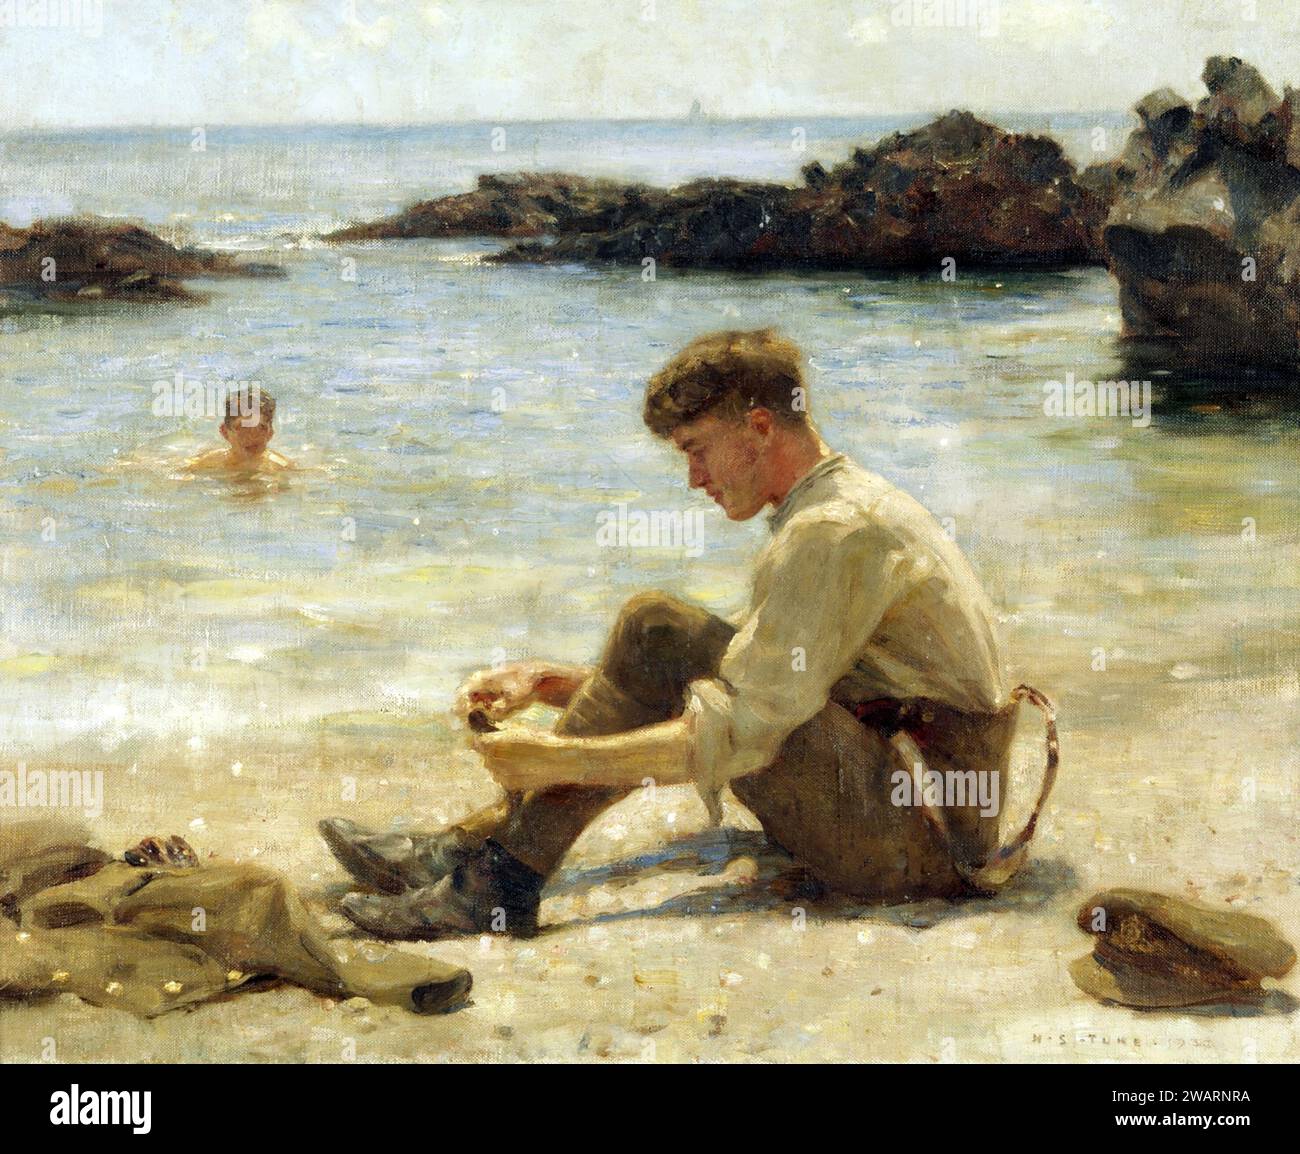 Henry Scott Tuke. Painting entitled 'T. E. Lawrence as a cadet at Newporth Beach, near Falmouth' by the English artist, Henry Scott Tuke (1858-1929), oil on canvas, c. 1921/22 Stock Photo